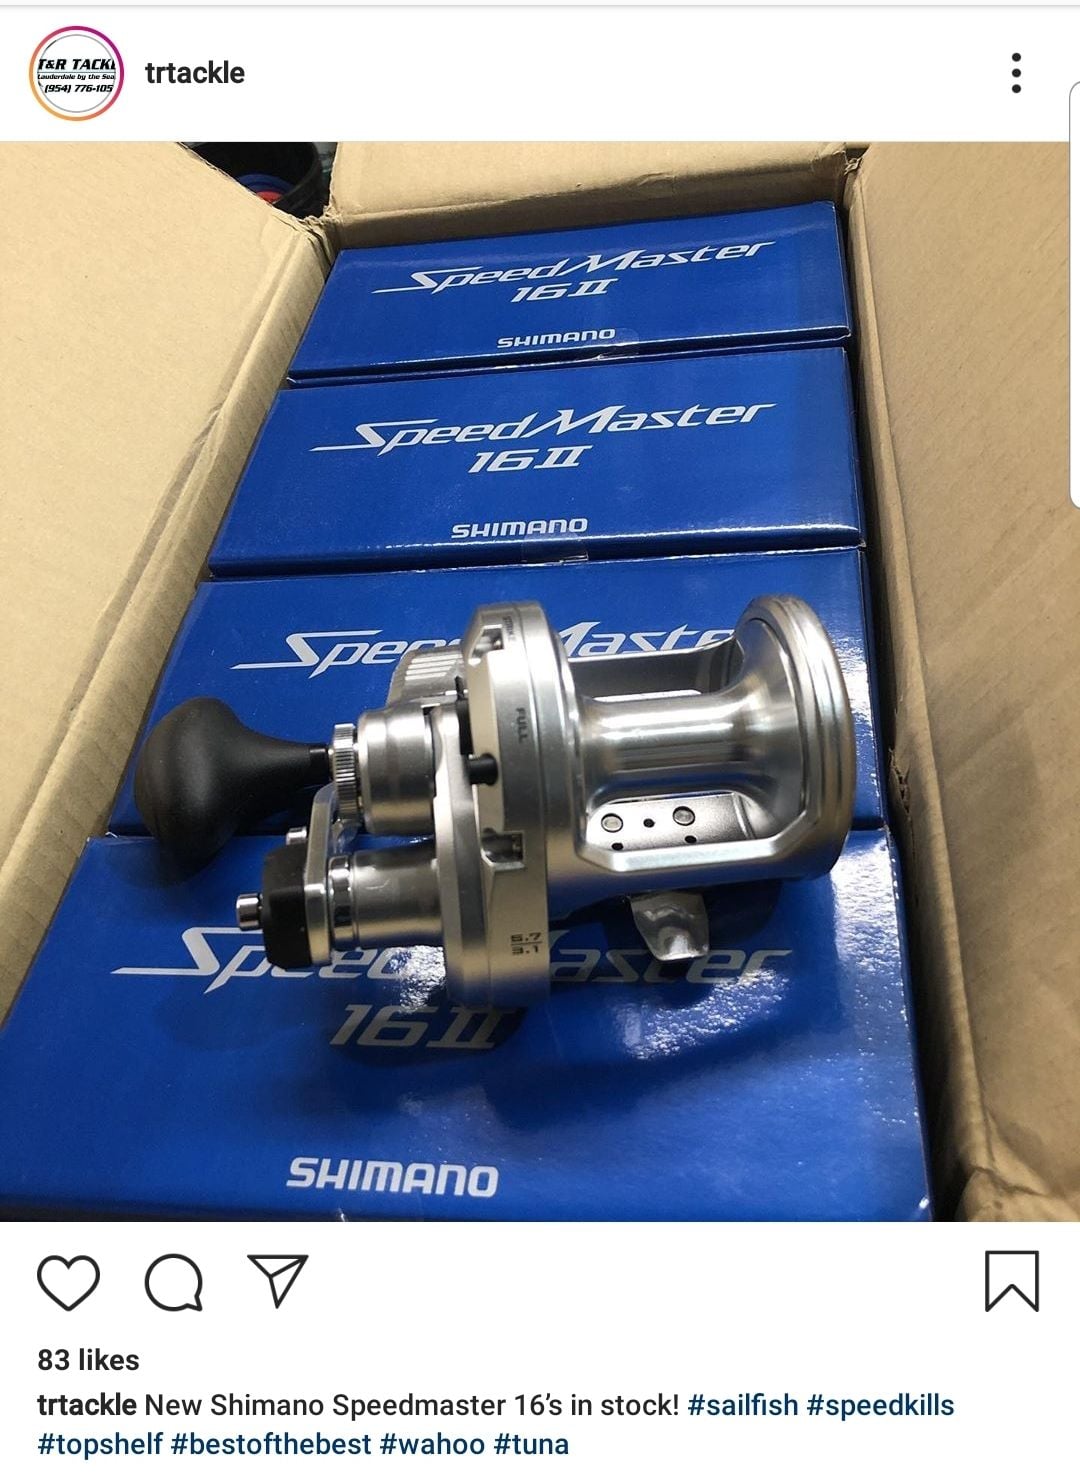 Shimano's New Speedmaster? - The Hull Truth - Boating and Fishing Forum